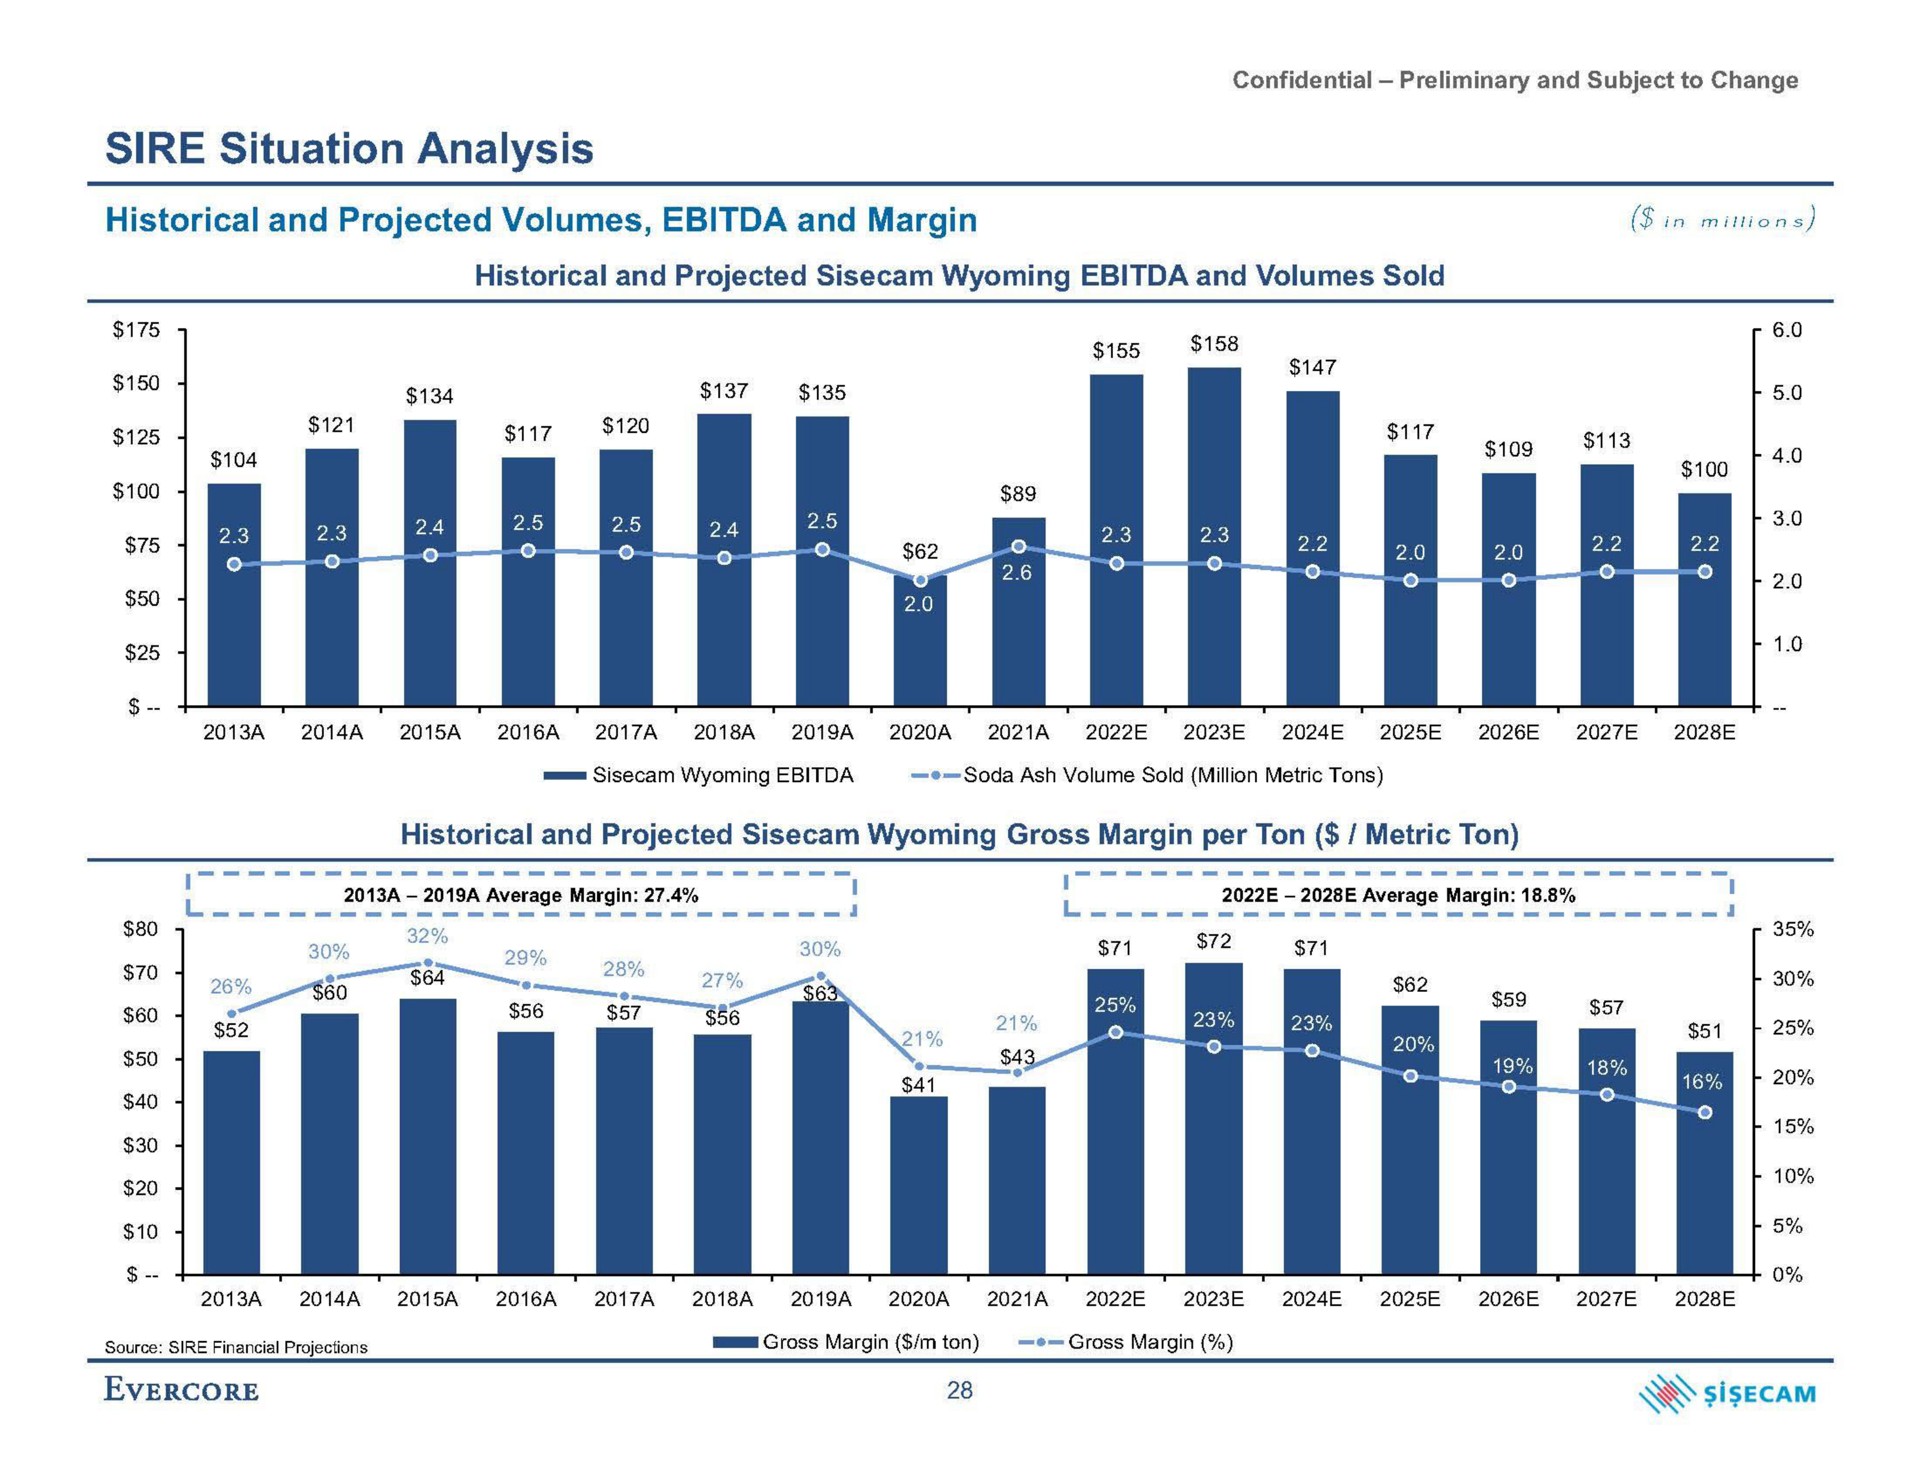 sire situation analysis historical and projected volumes and margin in | Evercore